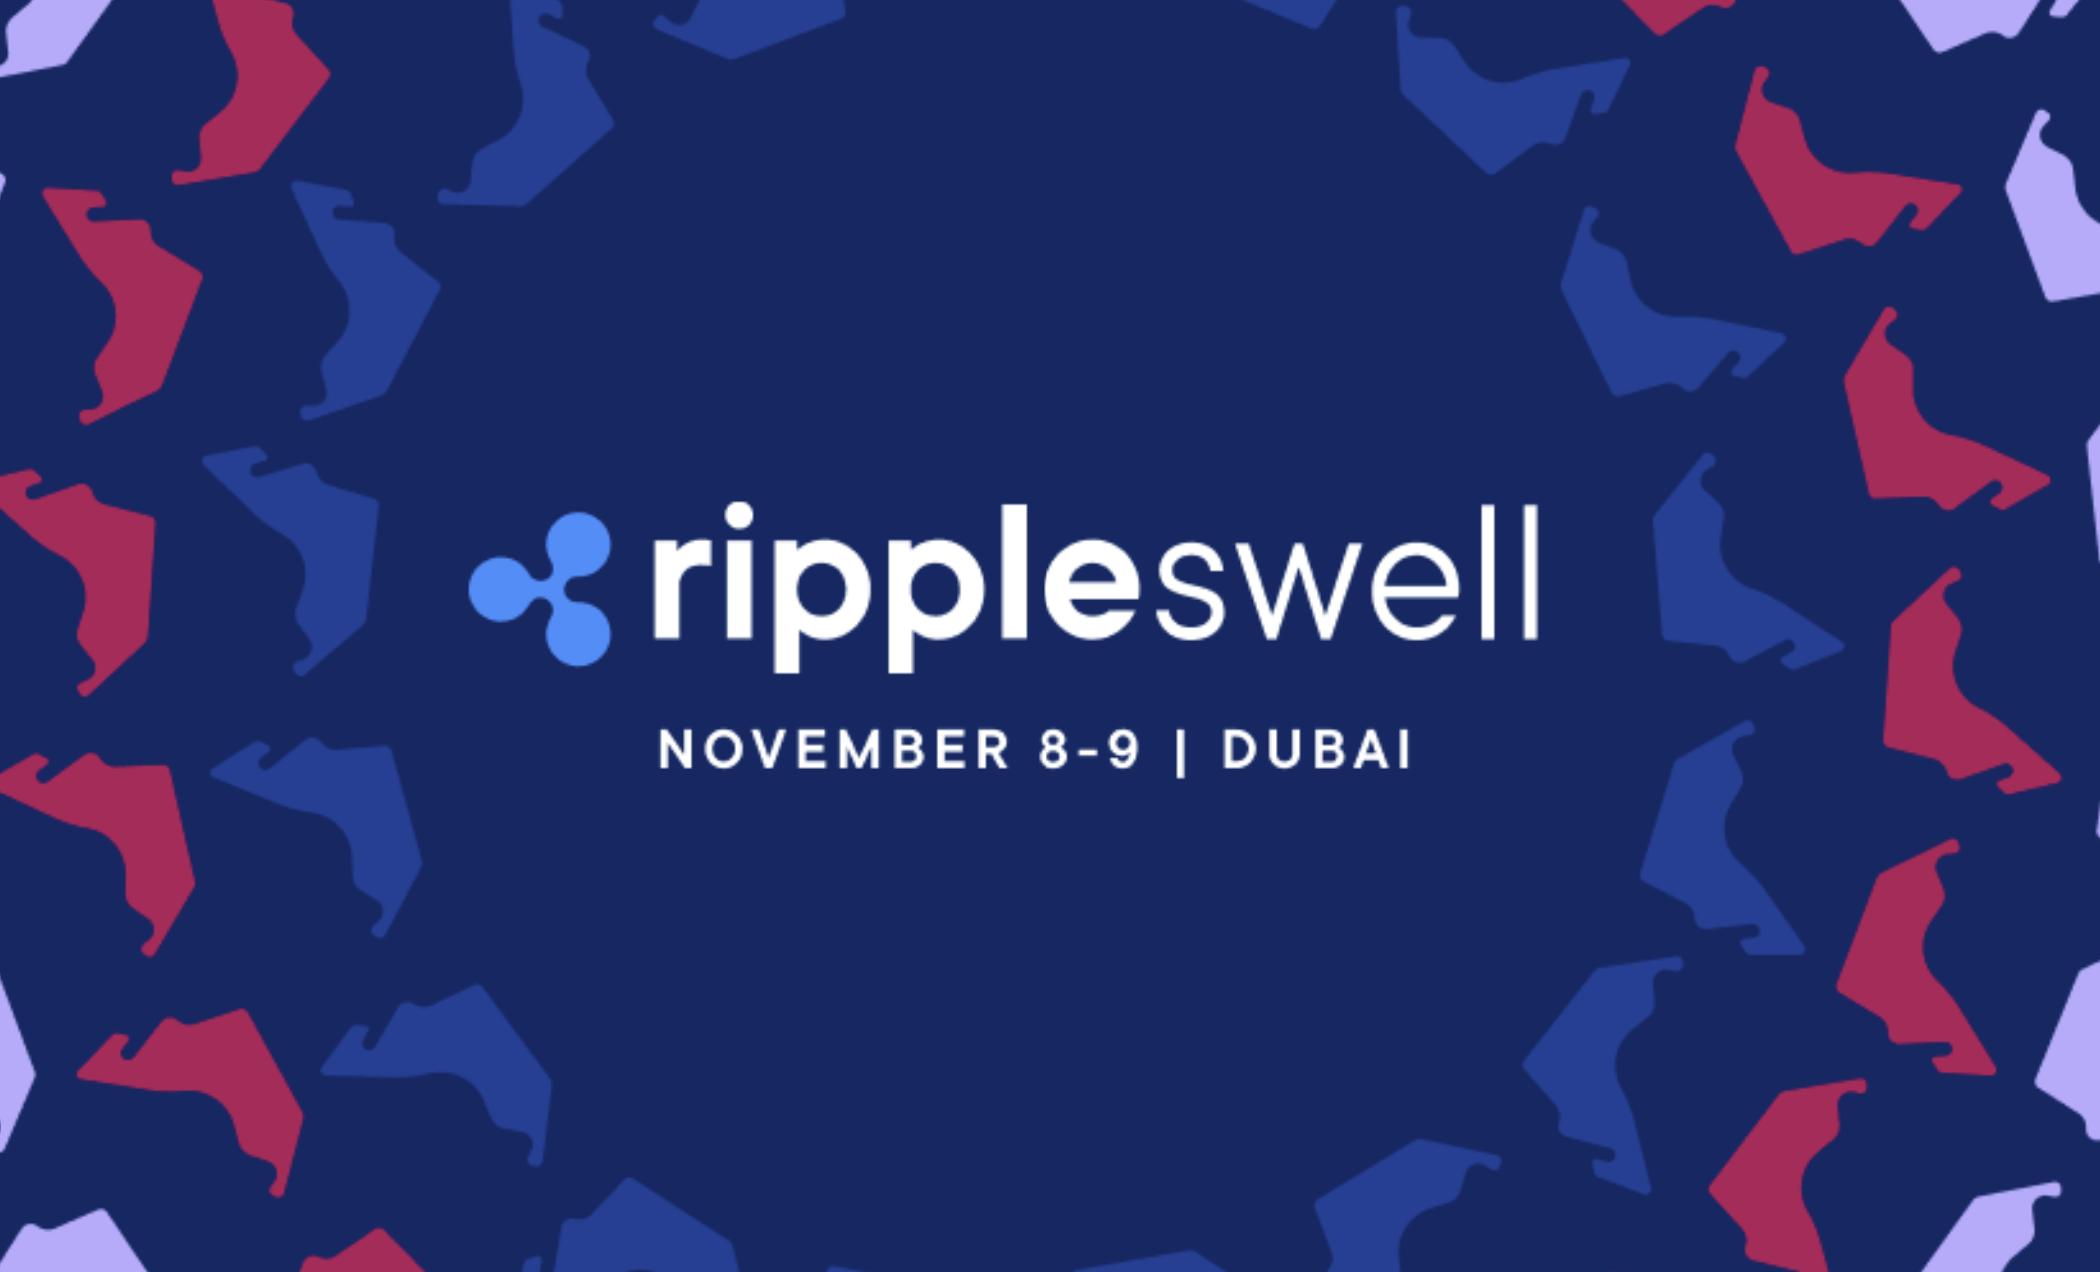 Bill Clinton Tapped as Keynote Speaker at Ripple's Swell Conference | Live Bitcoin News